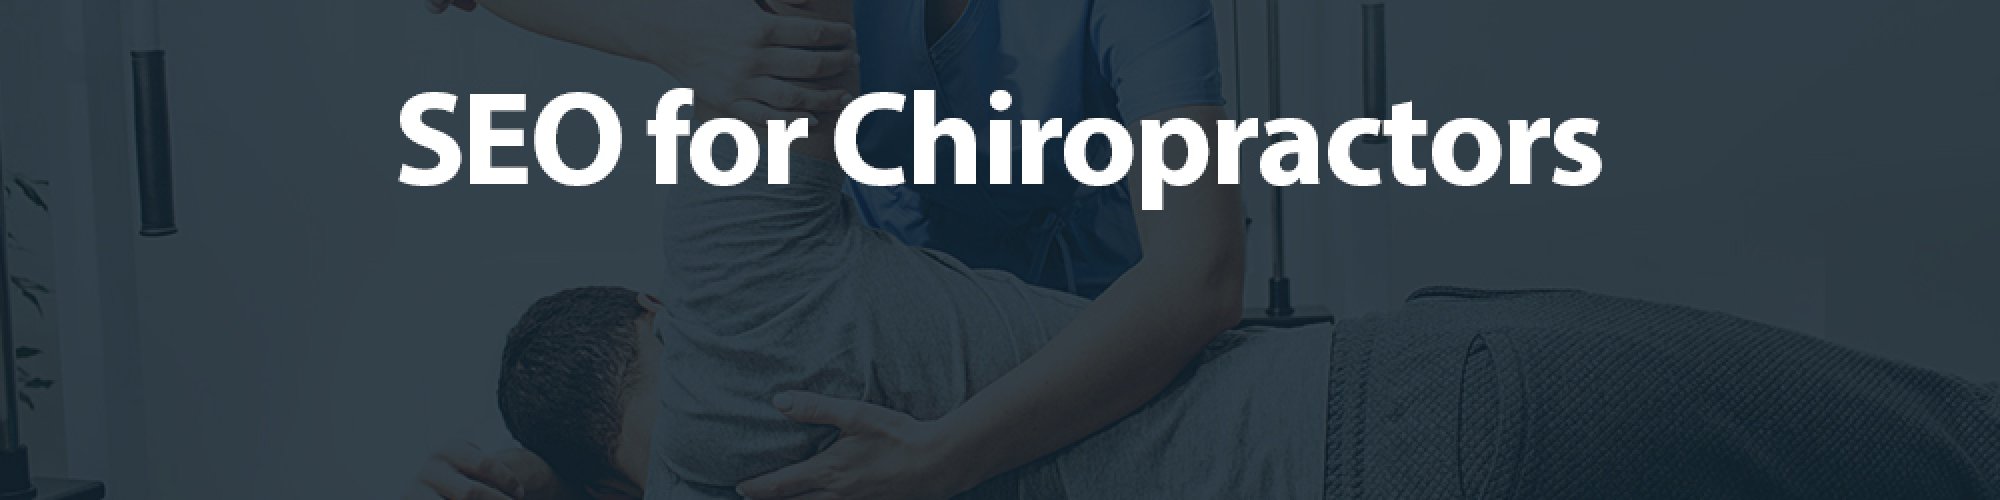 Web Cures Digital Chiropractor SEO Irving